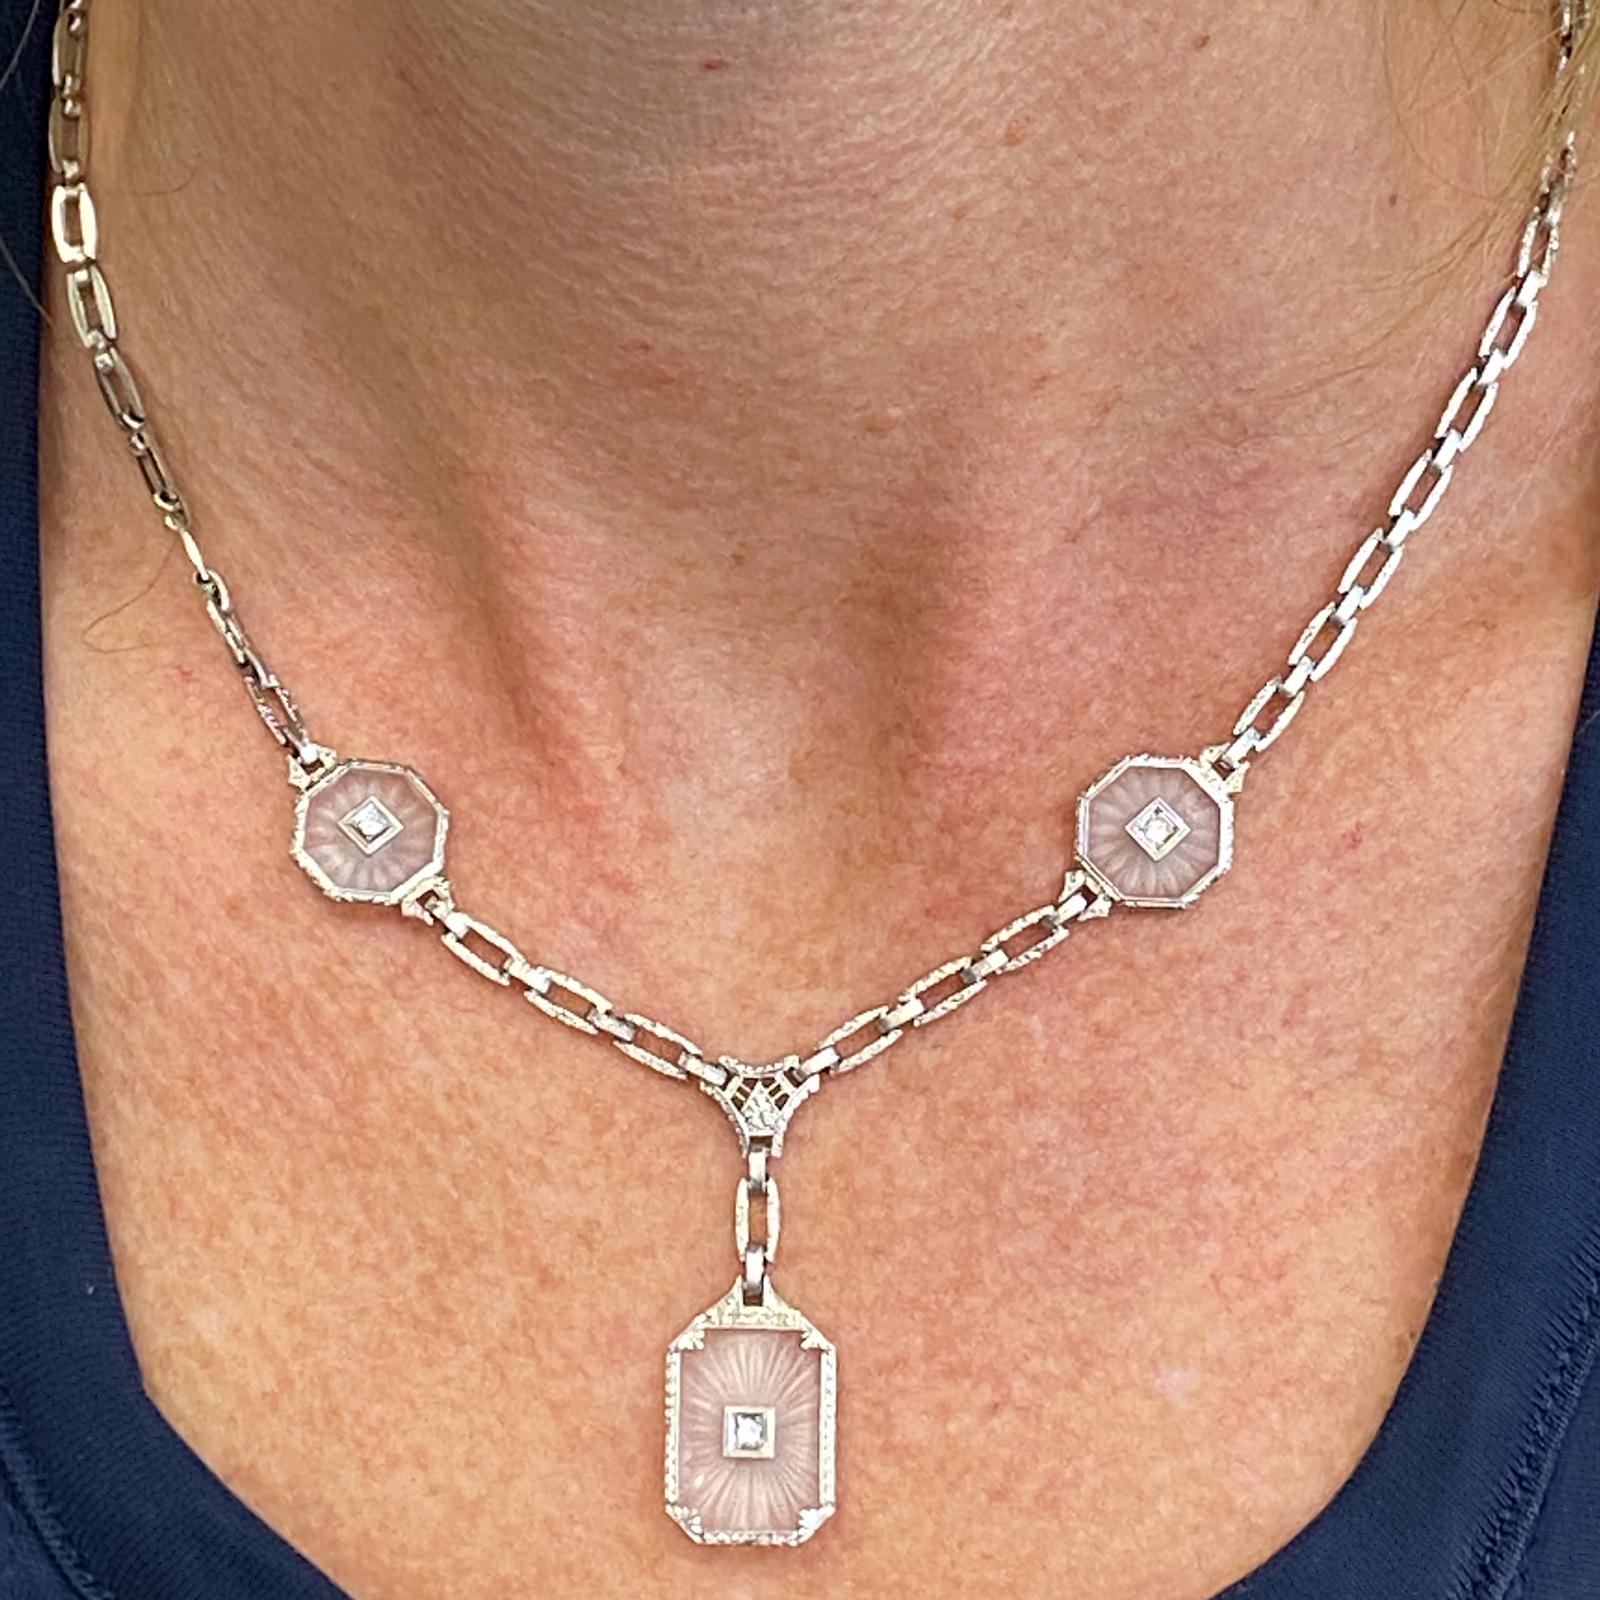 Rock Crystal Diamond Vintage drop necklace is fashioned in 14 karat white gold. The necklace features carved rock crystal stations centered with Old European Cut Diamonds. The necklace measures 16 inches in length with a 1.25 inch drop. 